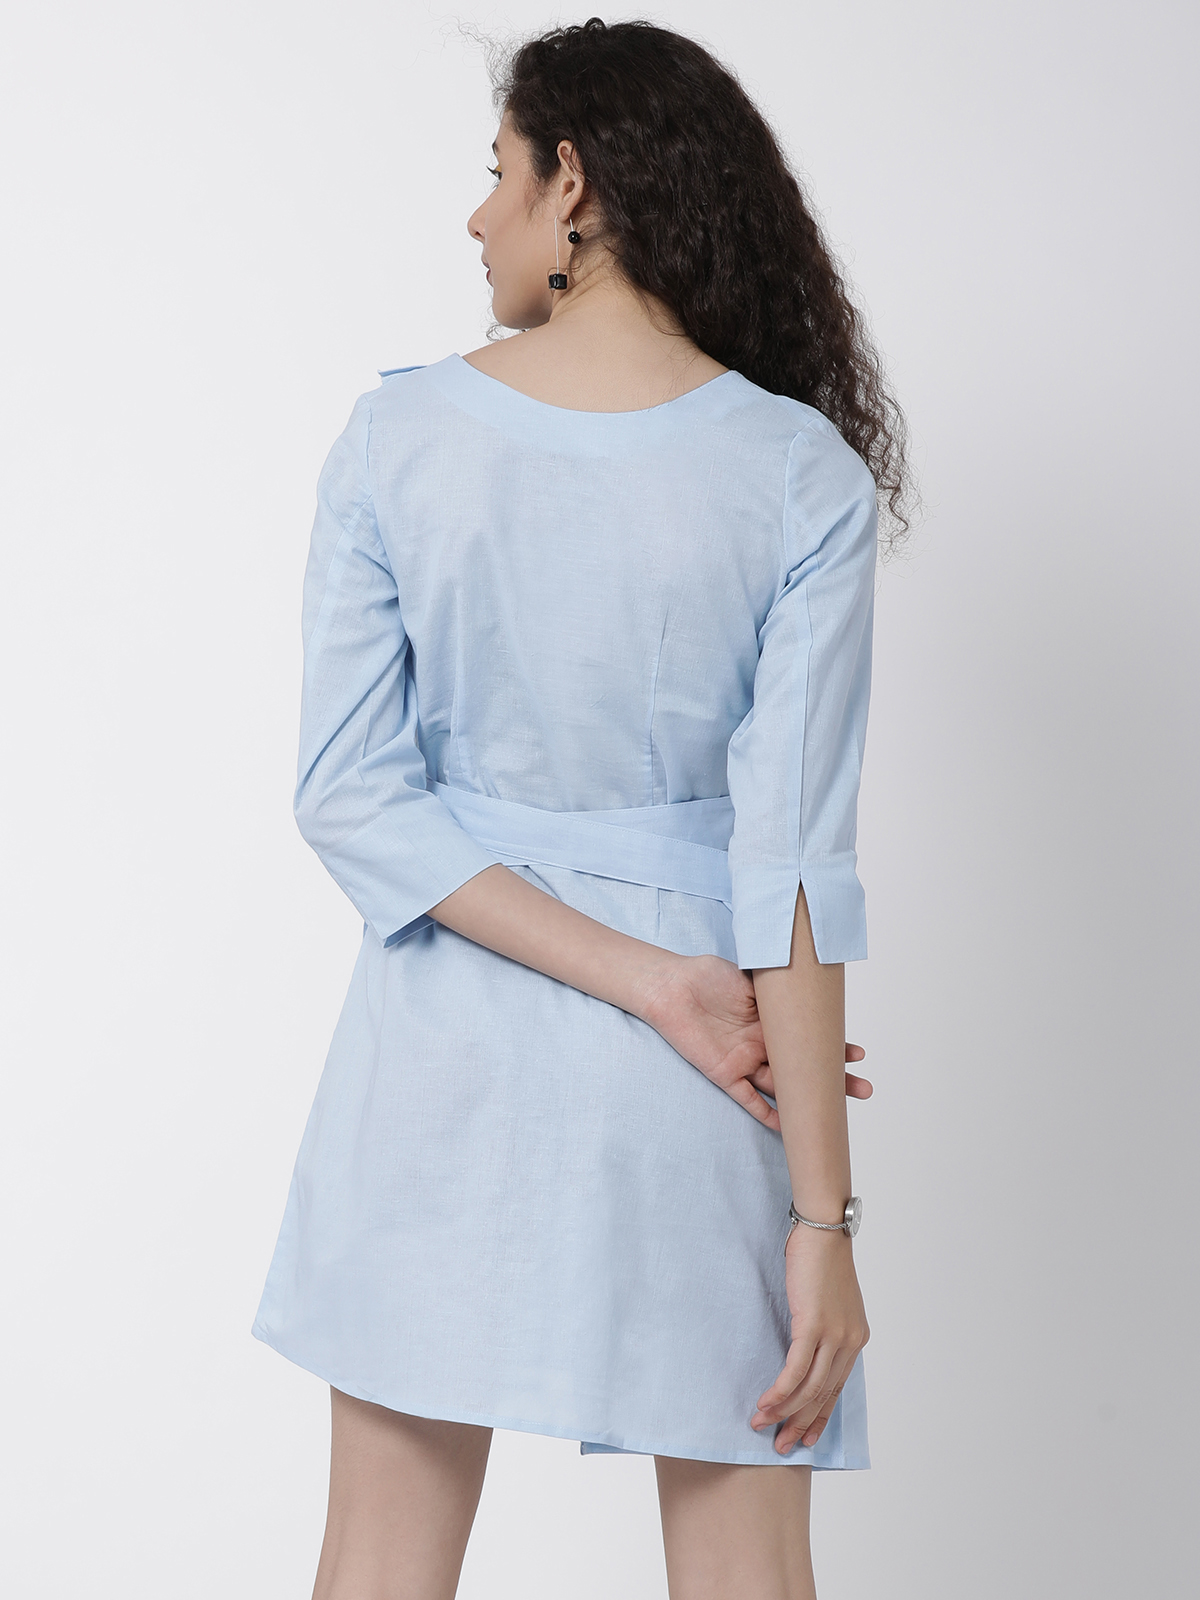  Pretty Blue Cotton Linen Casual One Piece With Self Tie Belt